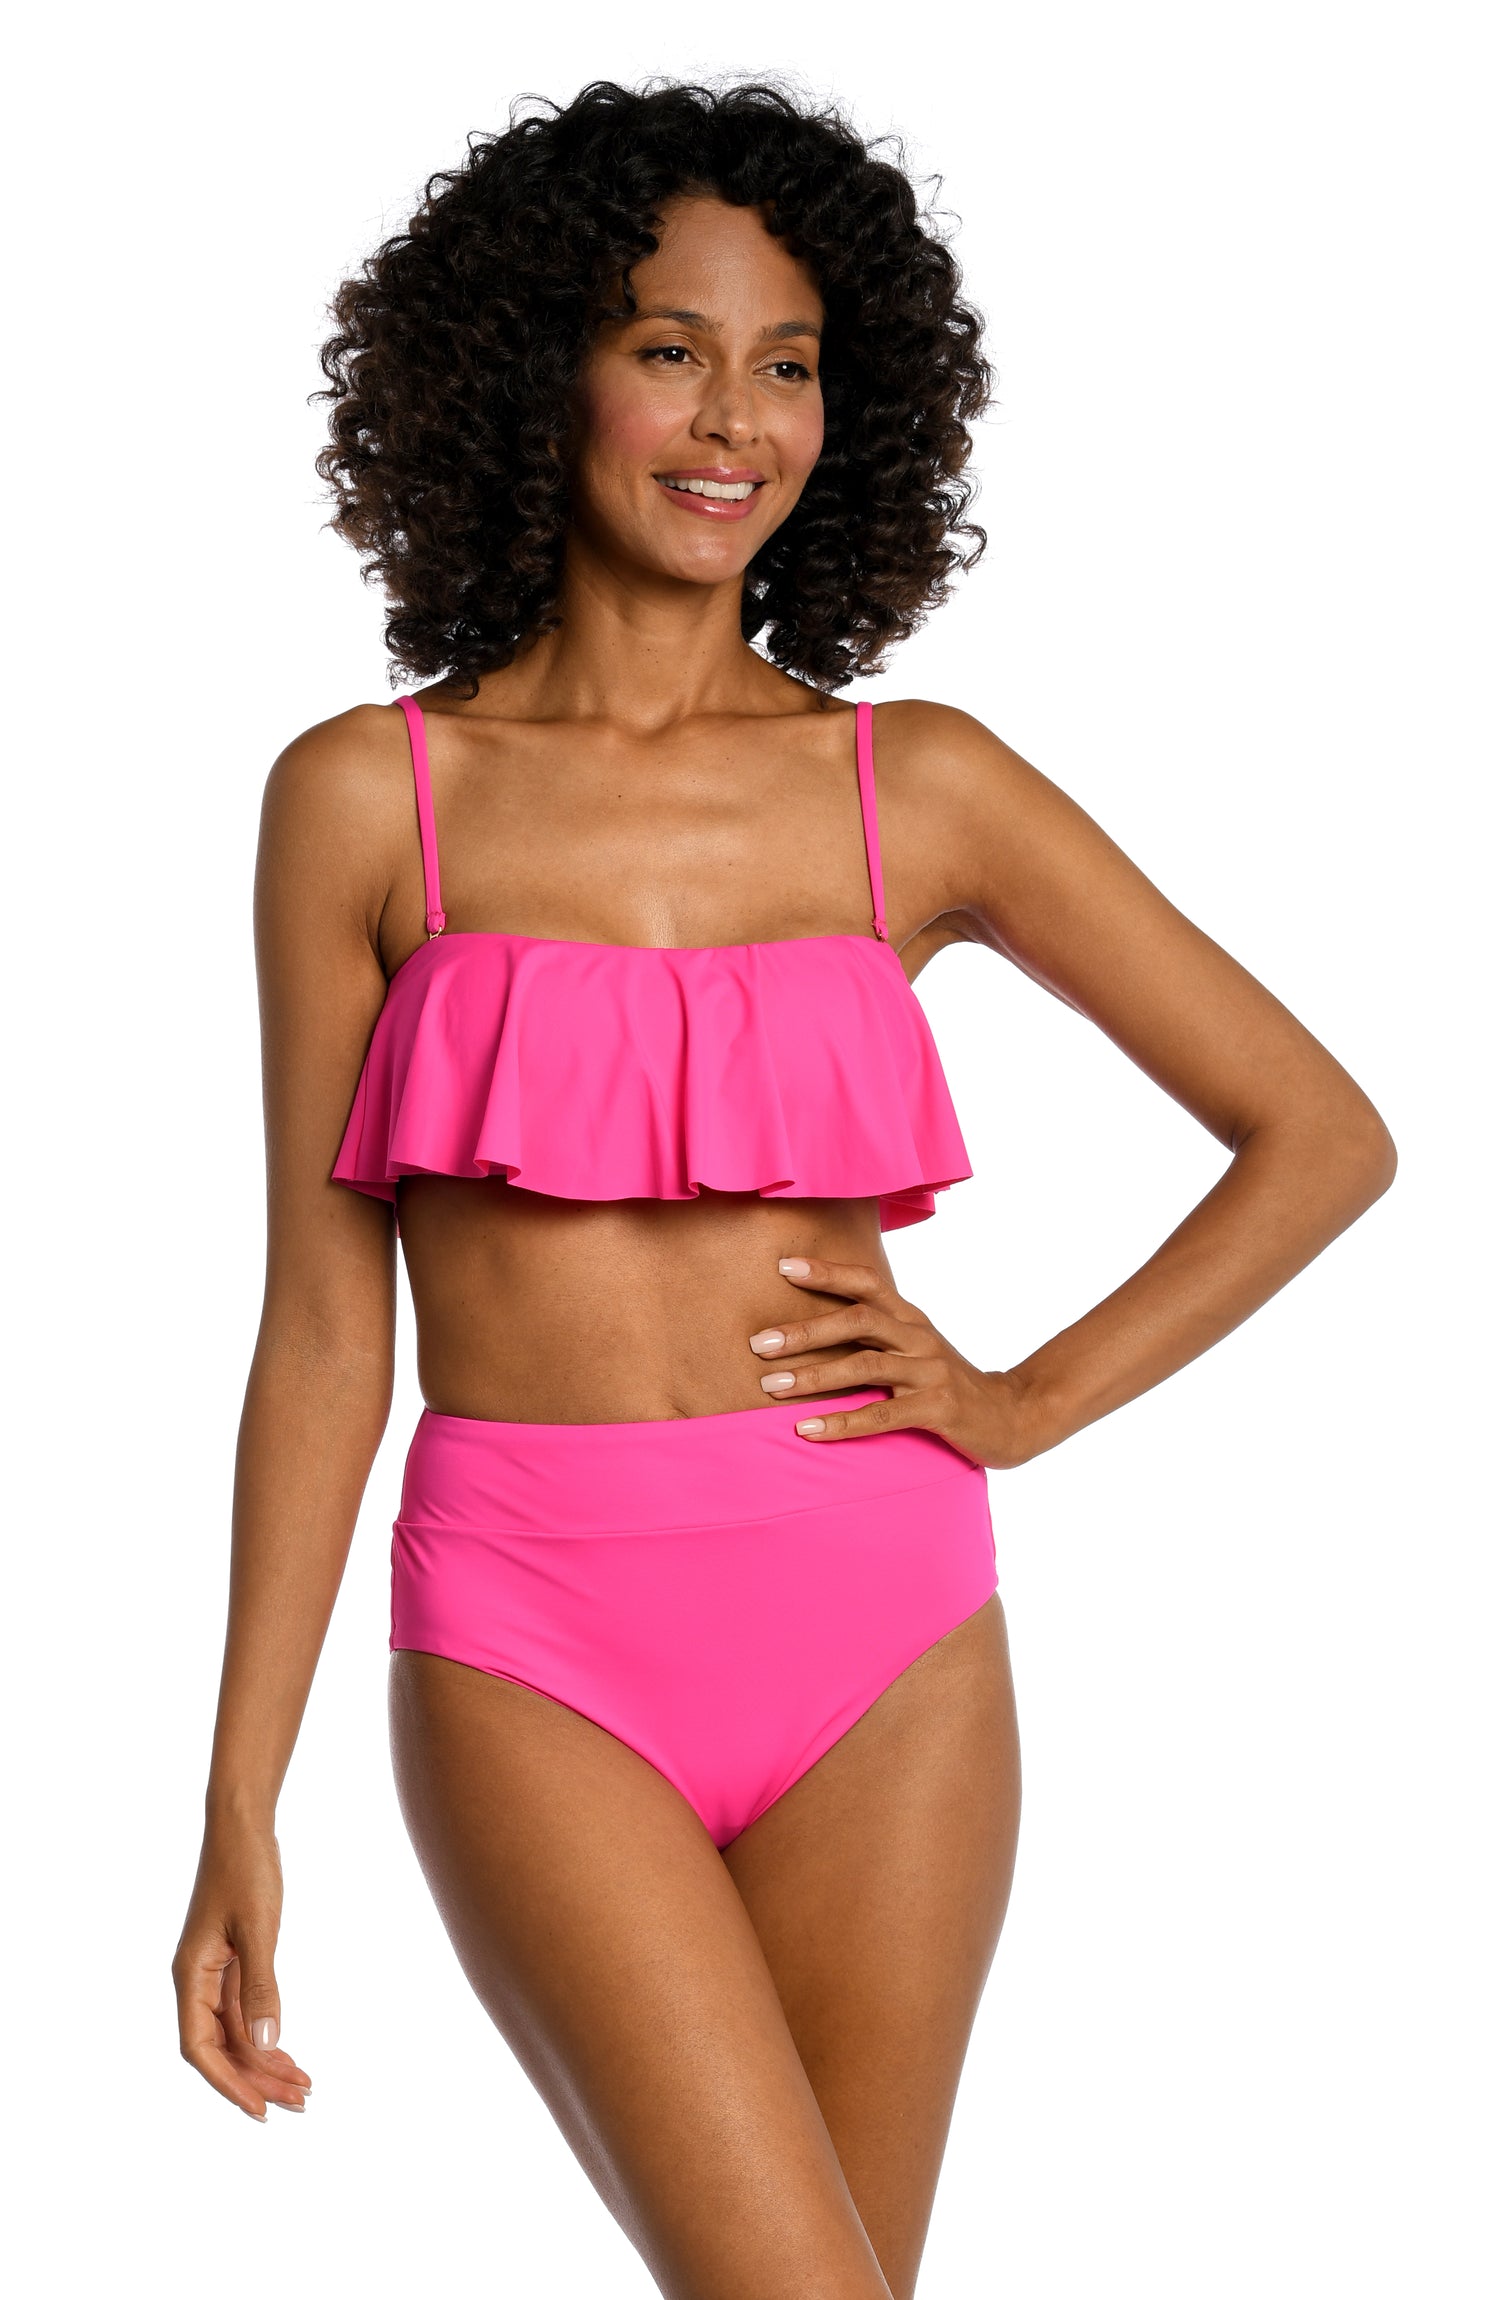 Model is wearing a pop pink colored ruffle bandeau swimsuit top from our Best-Selling Island Goddess collection.